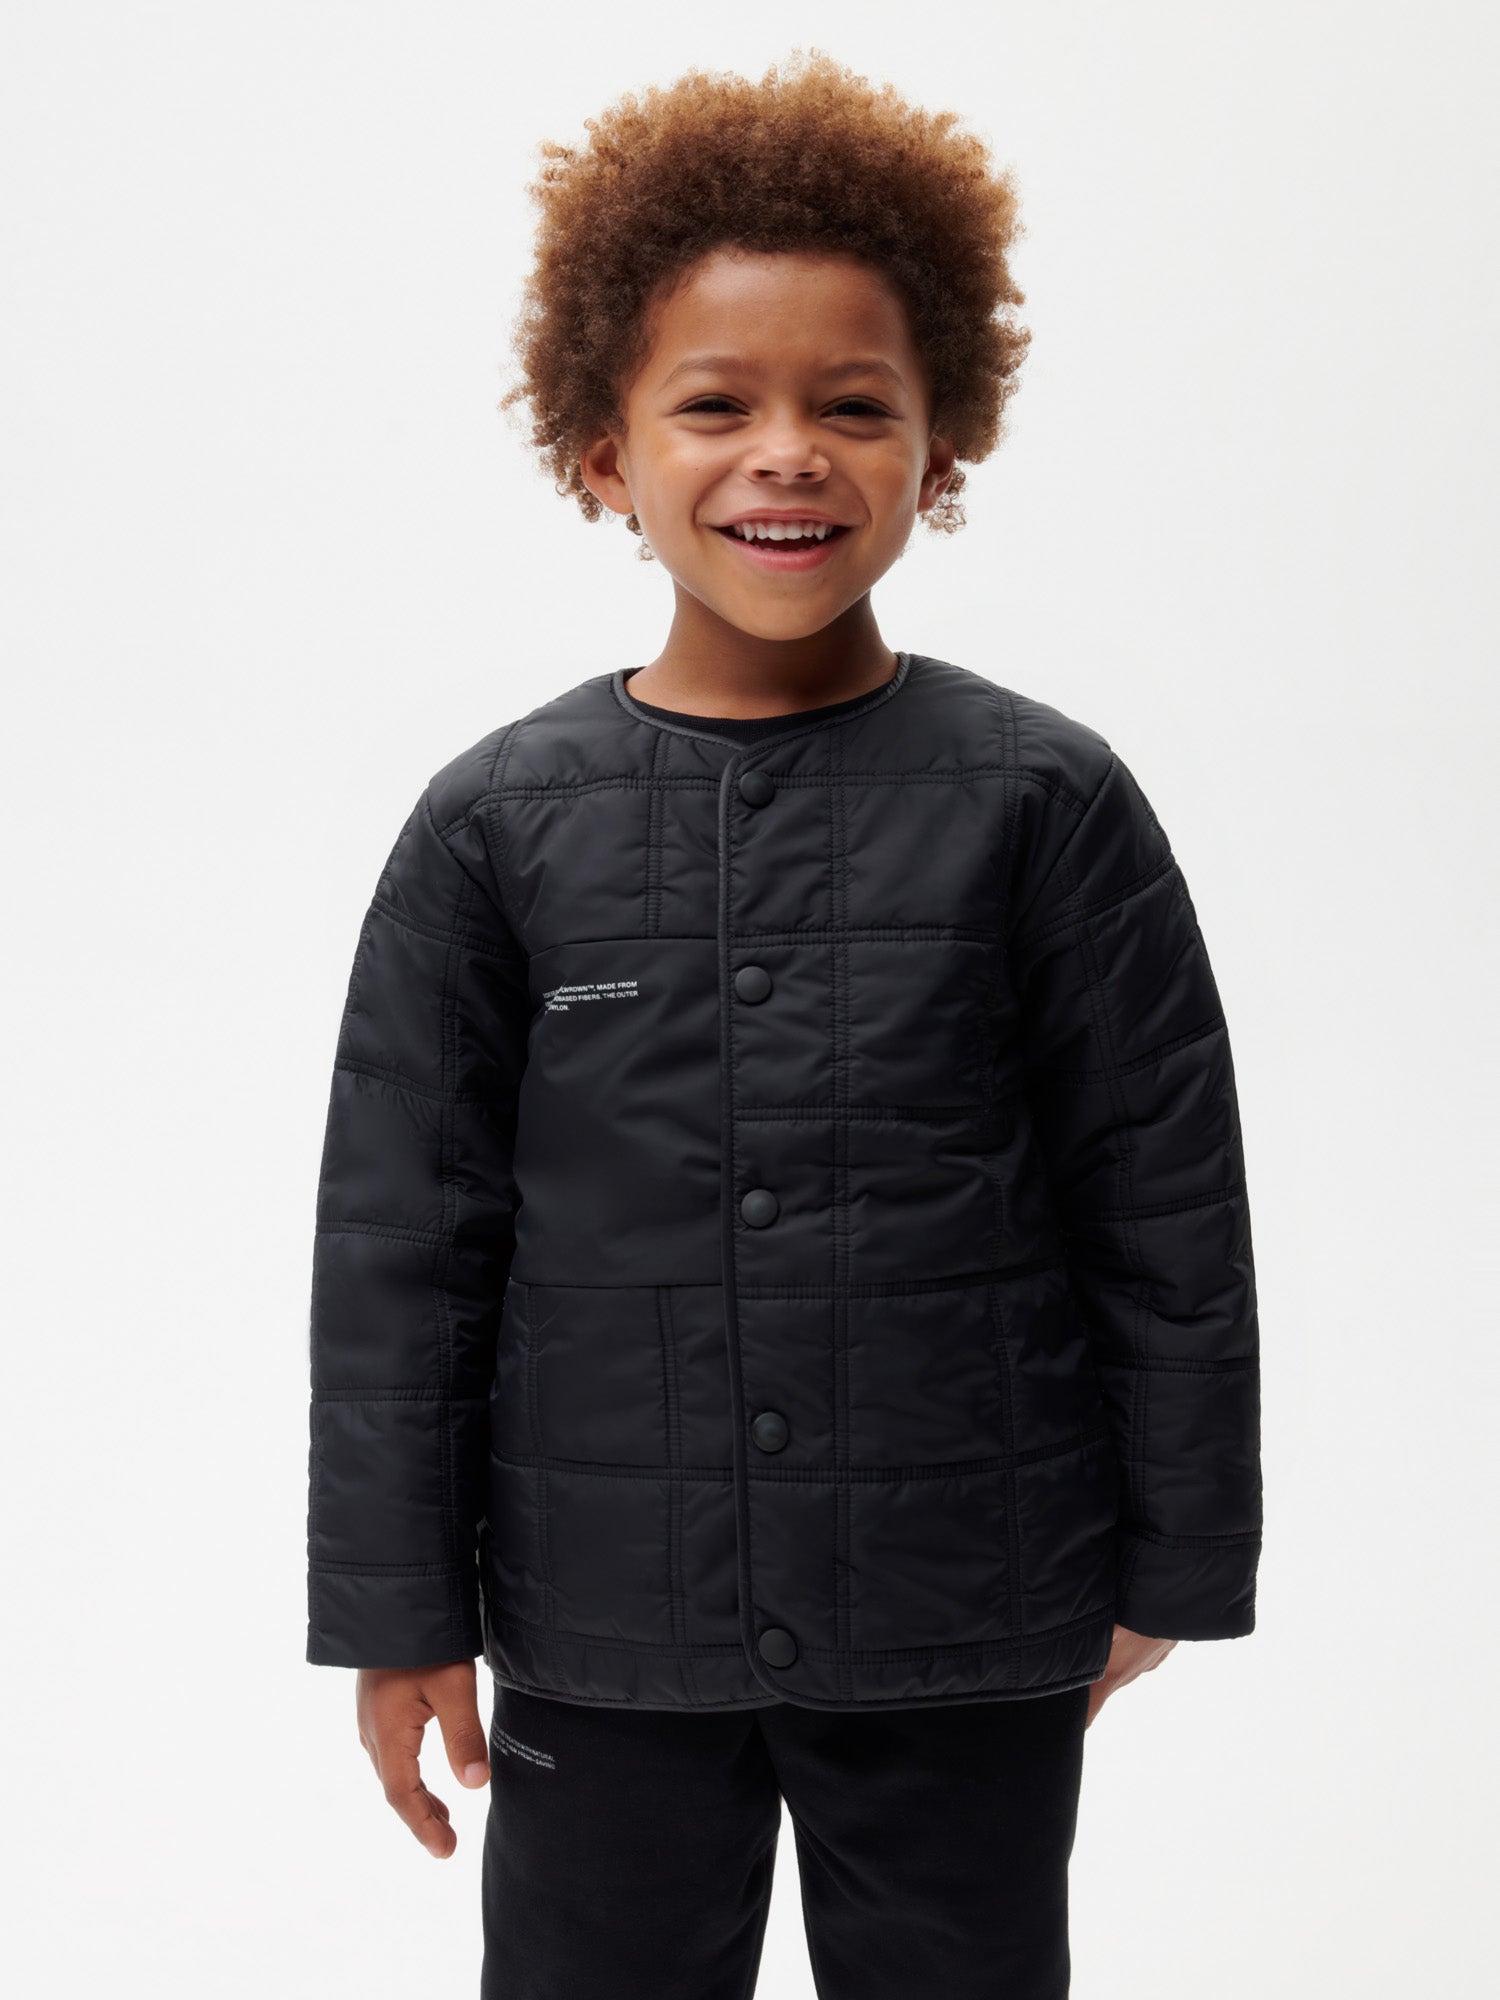 Kids-Recycled-Nylon-NW-FLWRDWN-Quilted-Collarless-Jacket-Black-3